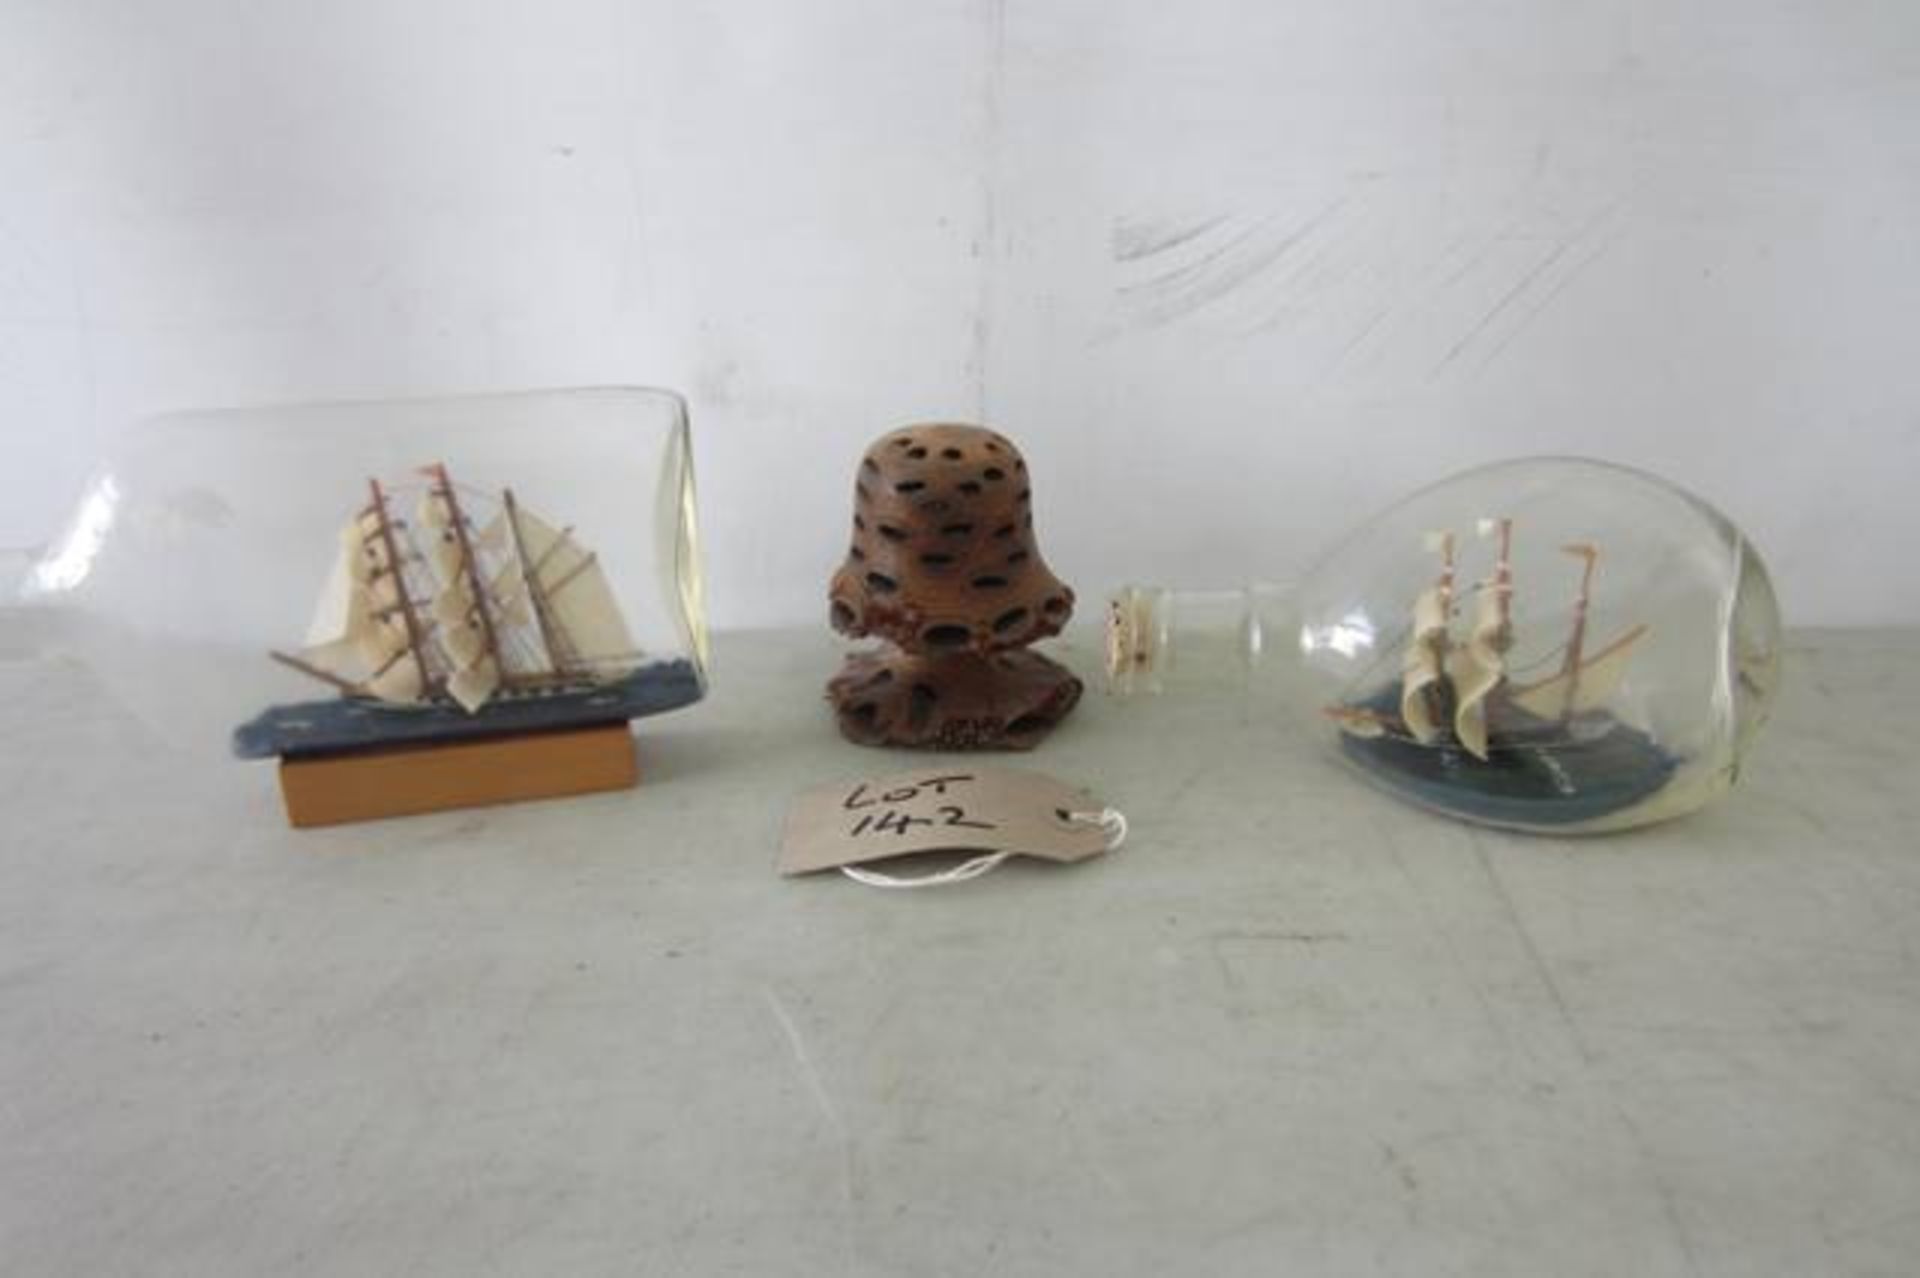 2 x Sailing Ships in Bottles & A Hand Made Wood Mushroom Dated 28/8/97.